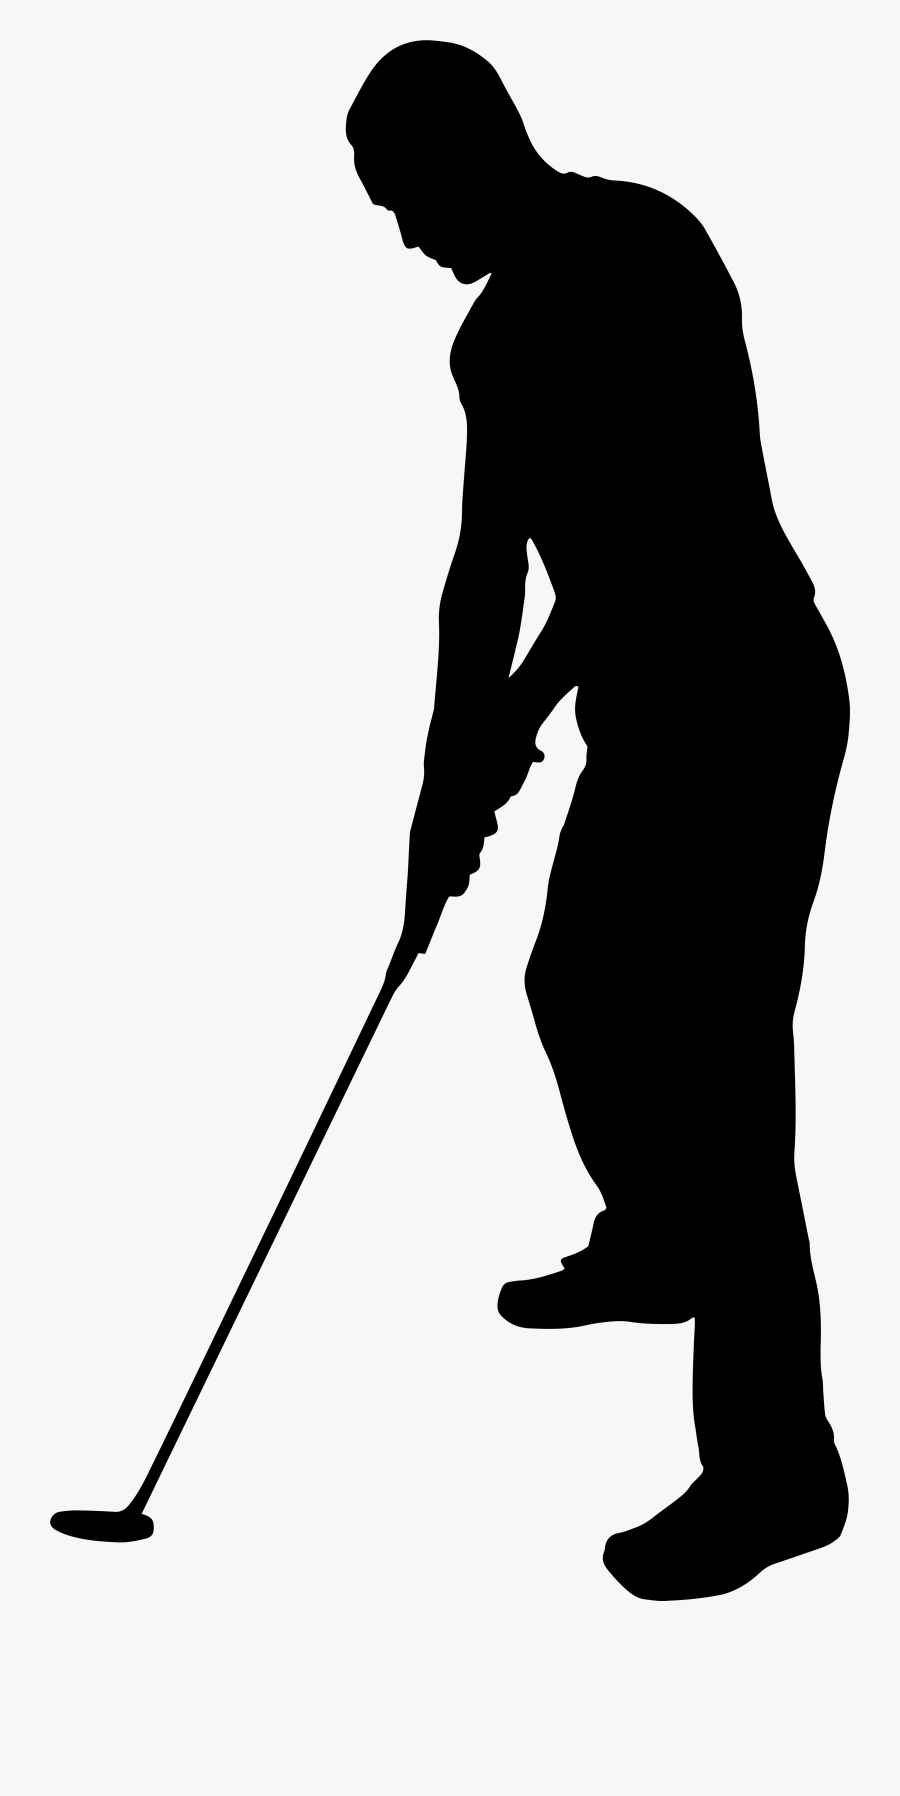 Player Silhouette Png Clip - Transparent Golf Silhouette Png, Transparent Clipart